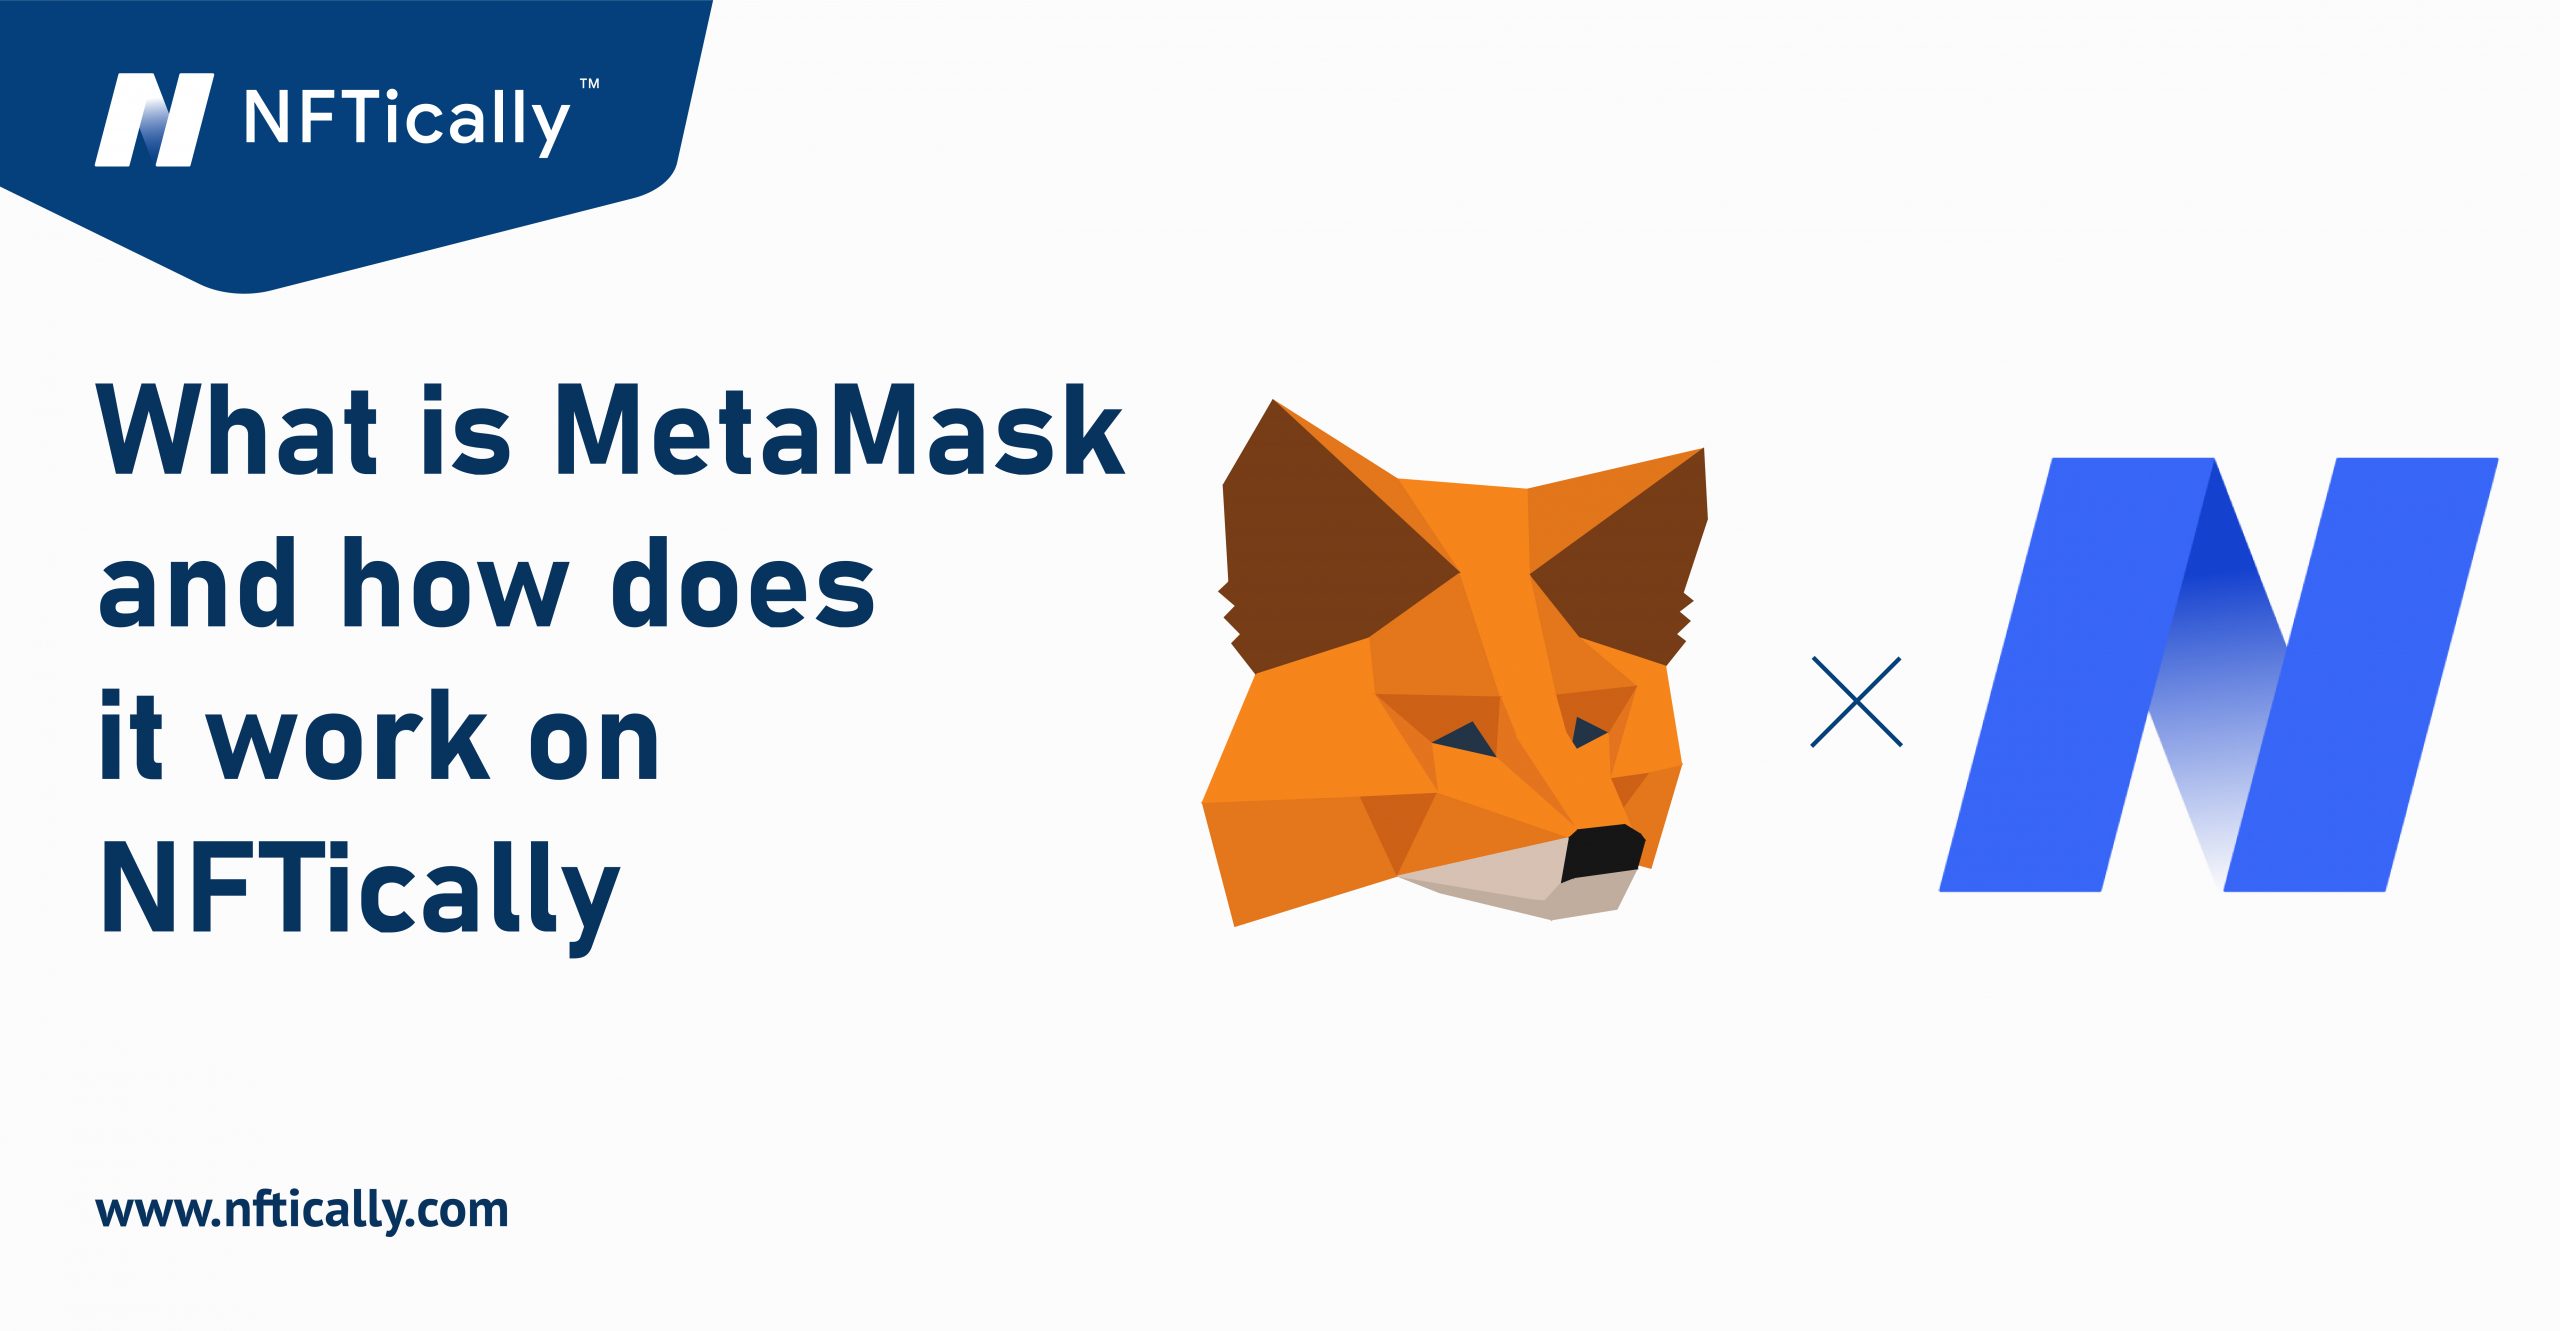 What is MetaMask and How does it work on NFTically?